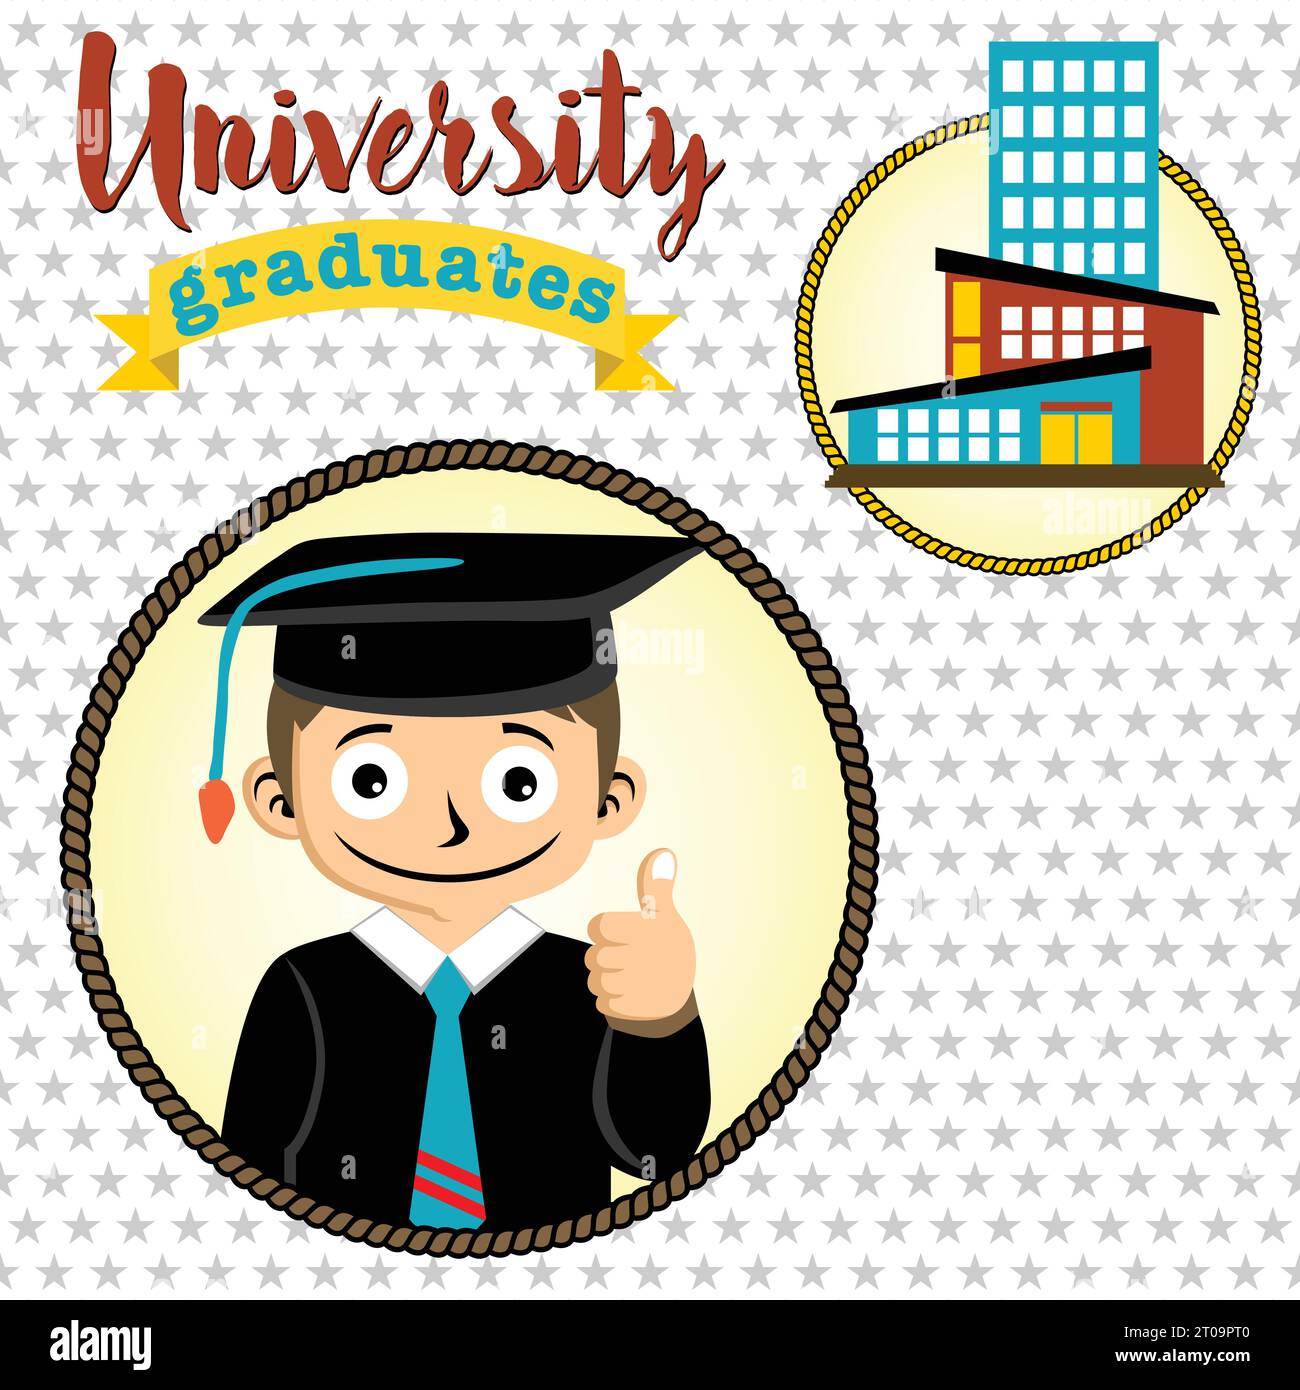 Young boy in graduate gown with university buildings, vector cartoon illustration Stock Vector